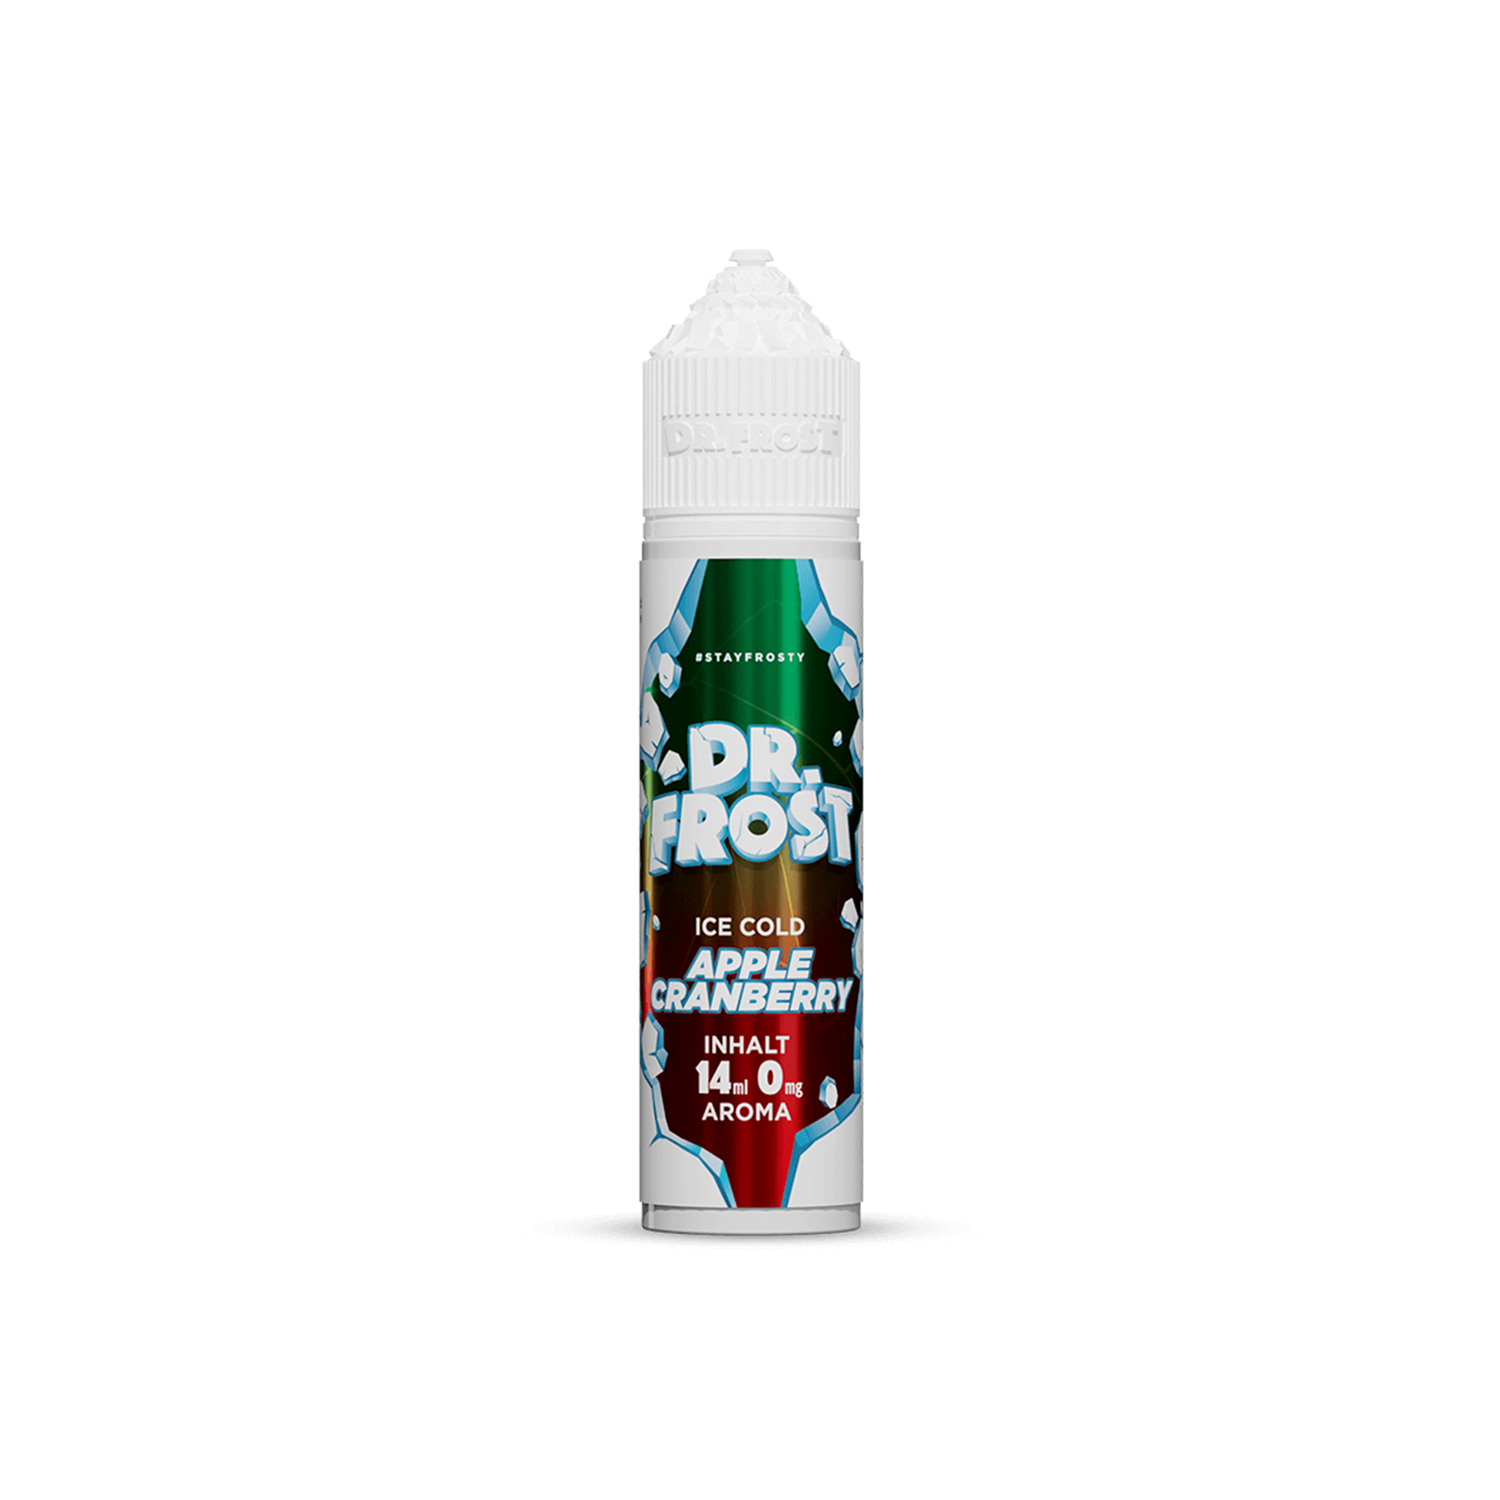 Dr. Frost - Ice Cold - Apple Cranberry 14ml Aroma